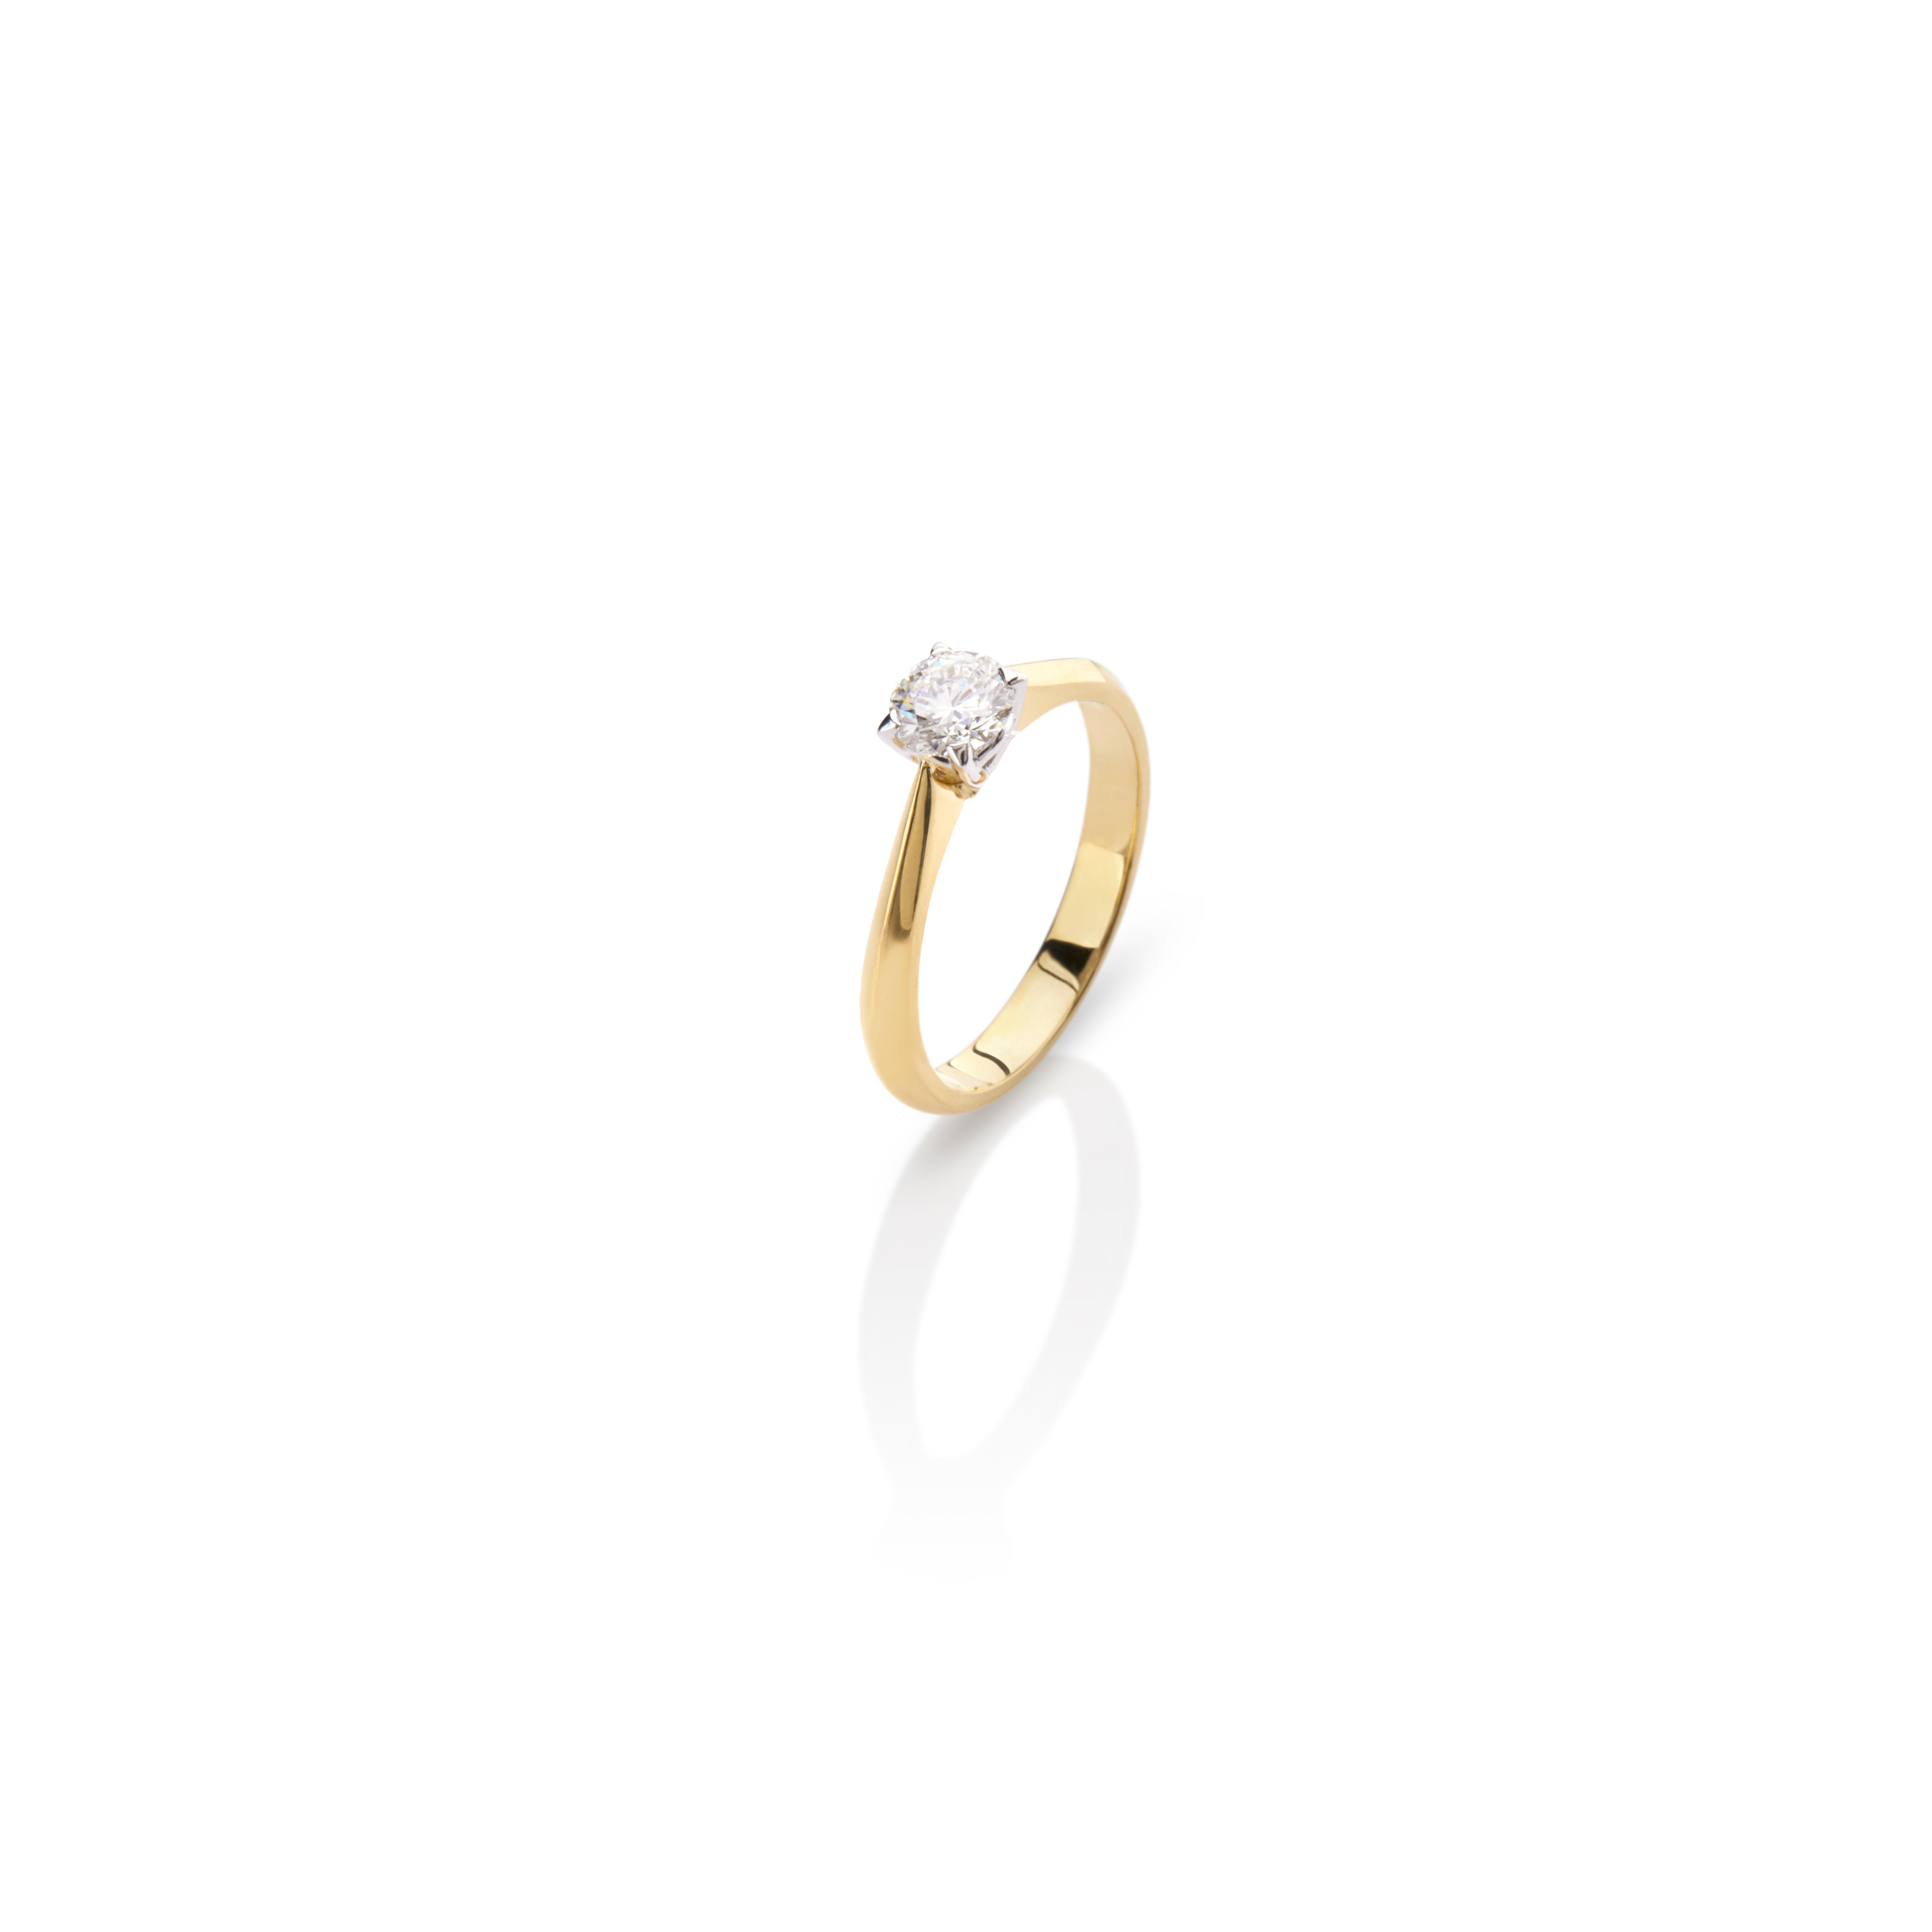 Unique Solitaire Ring made of 18Kt Yellow and white gold and a round GIA Certified 0.51 Carat brilliant cut diamond with four prongs setting. This simple setting enhances a diamond’s natural beauty and brilliance and promises to be a timeless fine